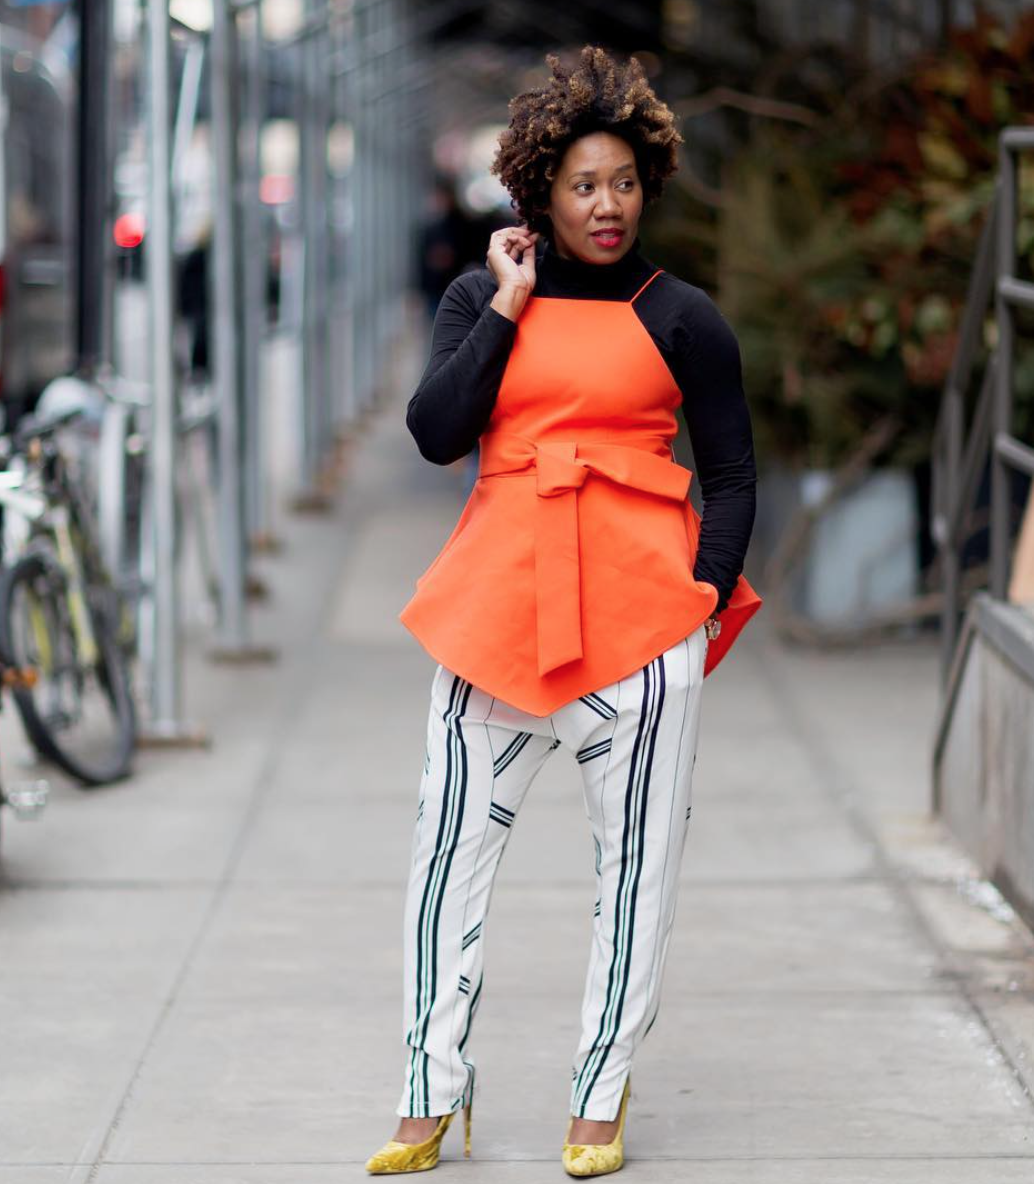 Fashion Bombshell of the Day: Mikaela from Brooklyn – Fashion Bomb ...